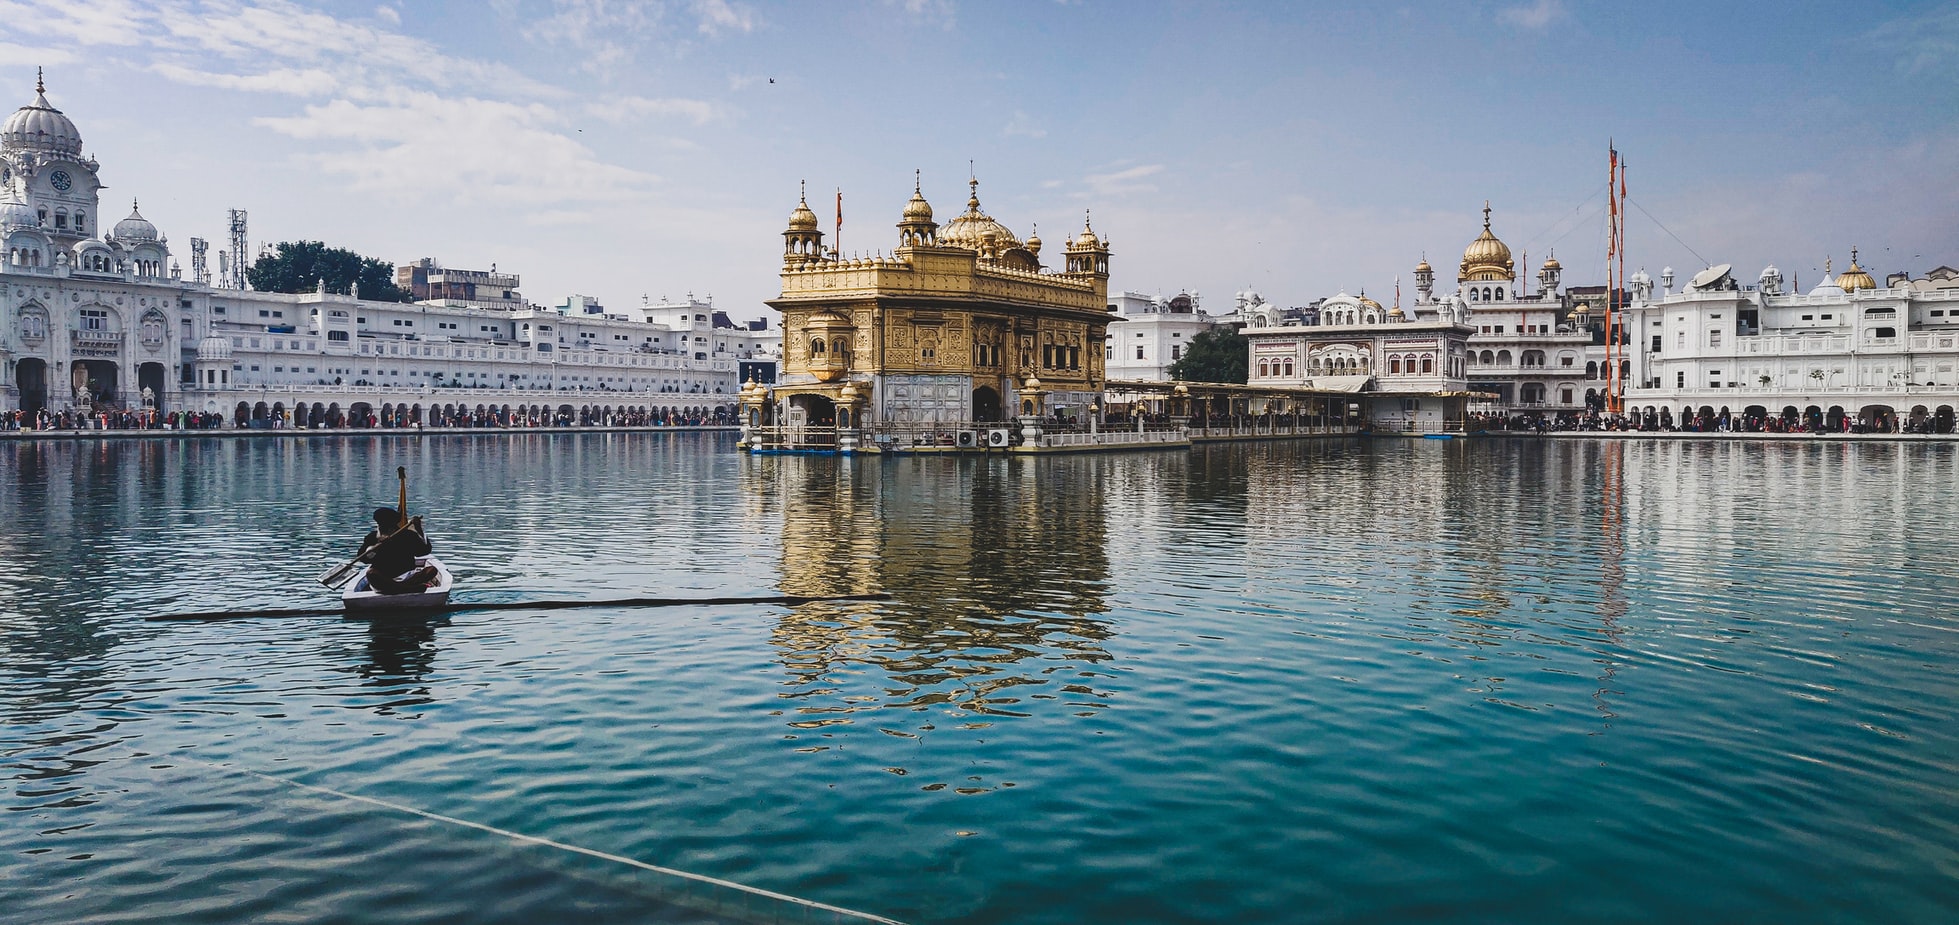 The Golden Temple - Among the Most Positive Places in the World - India  Someday Travels